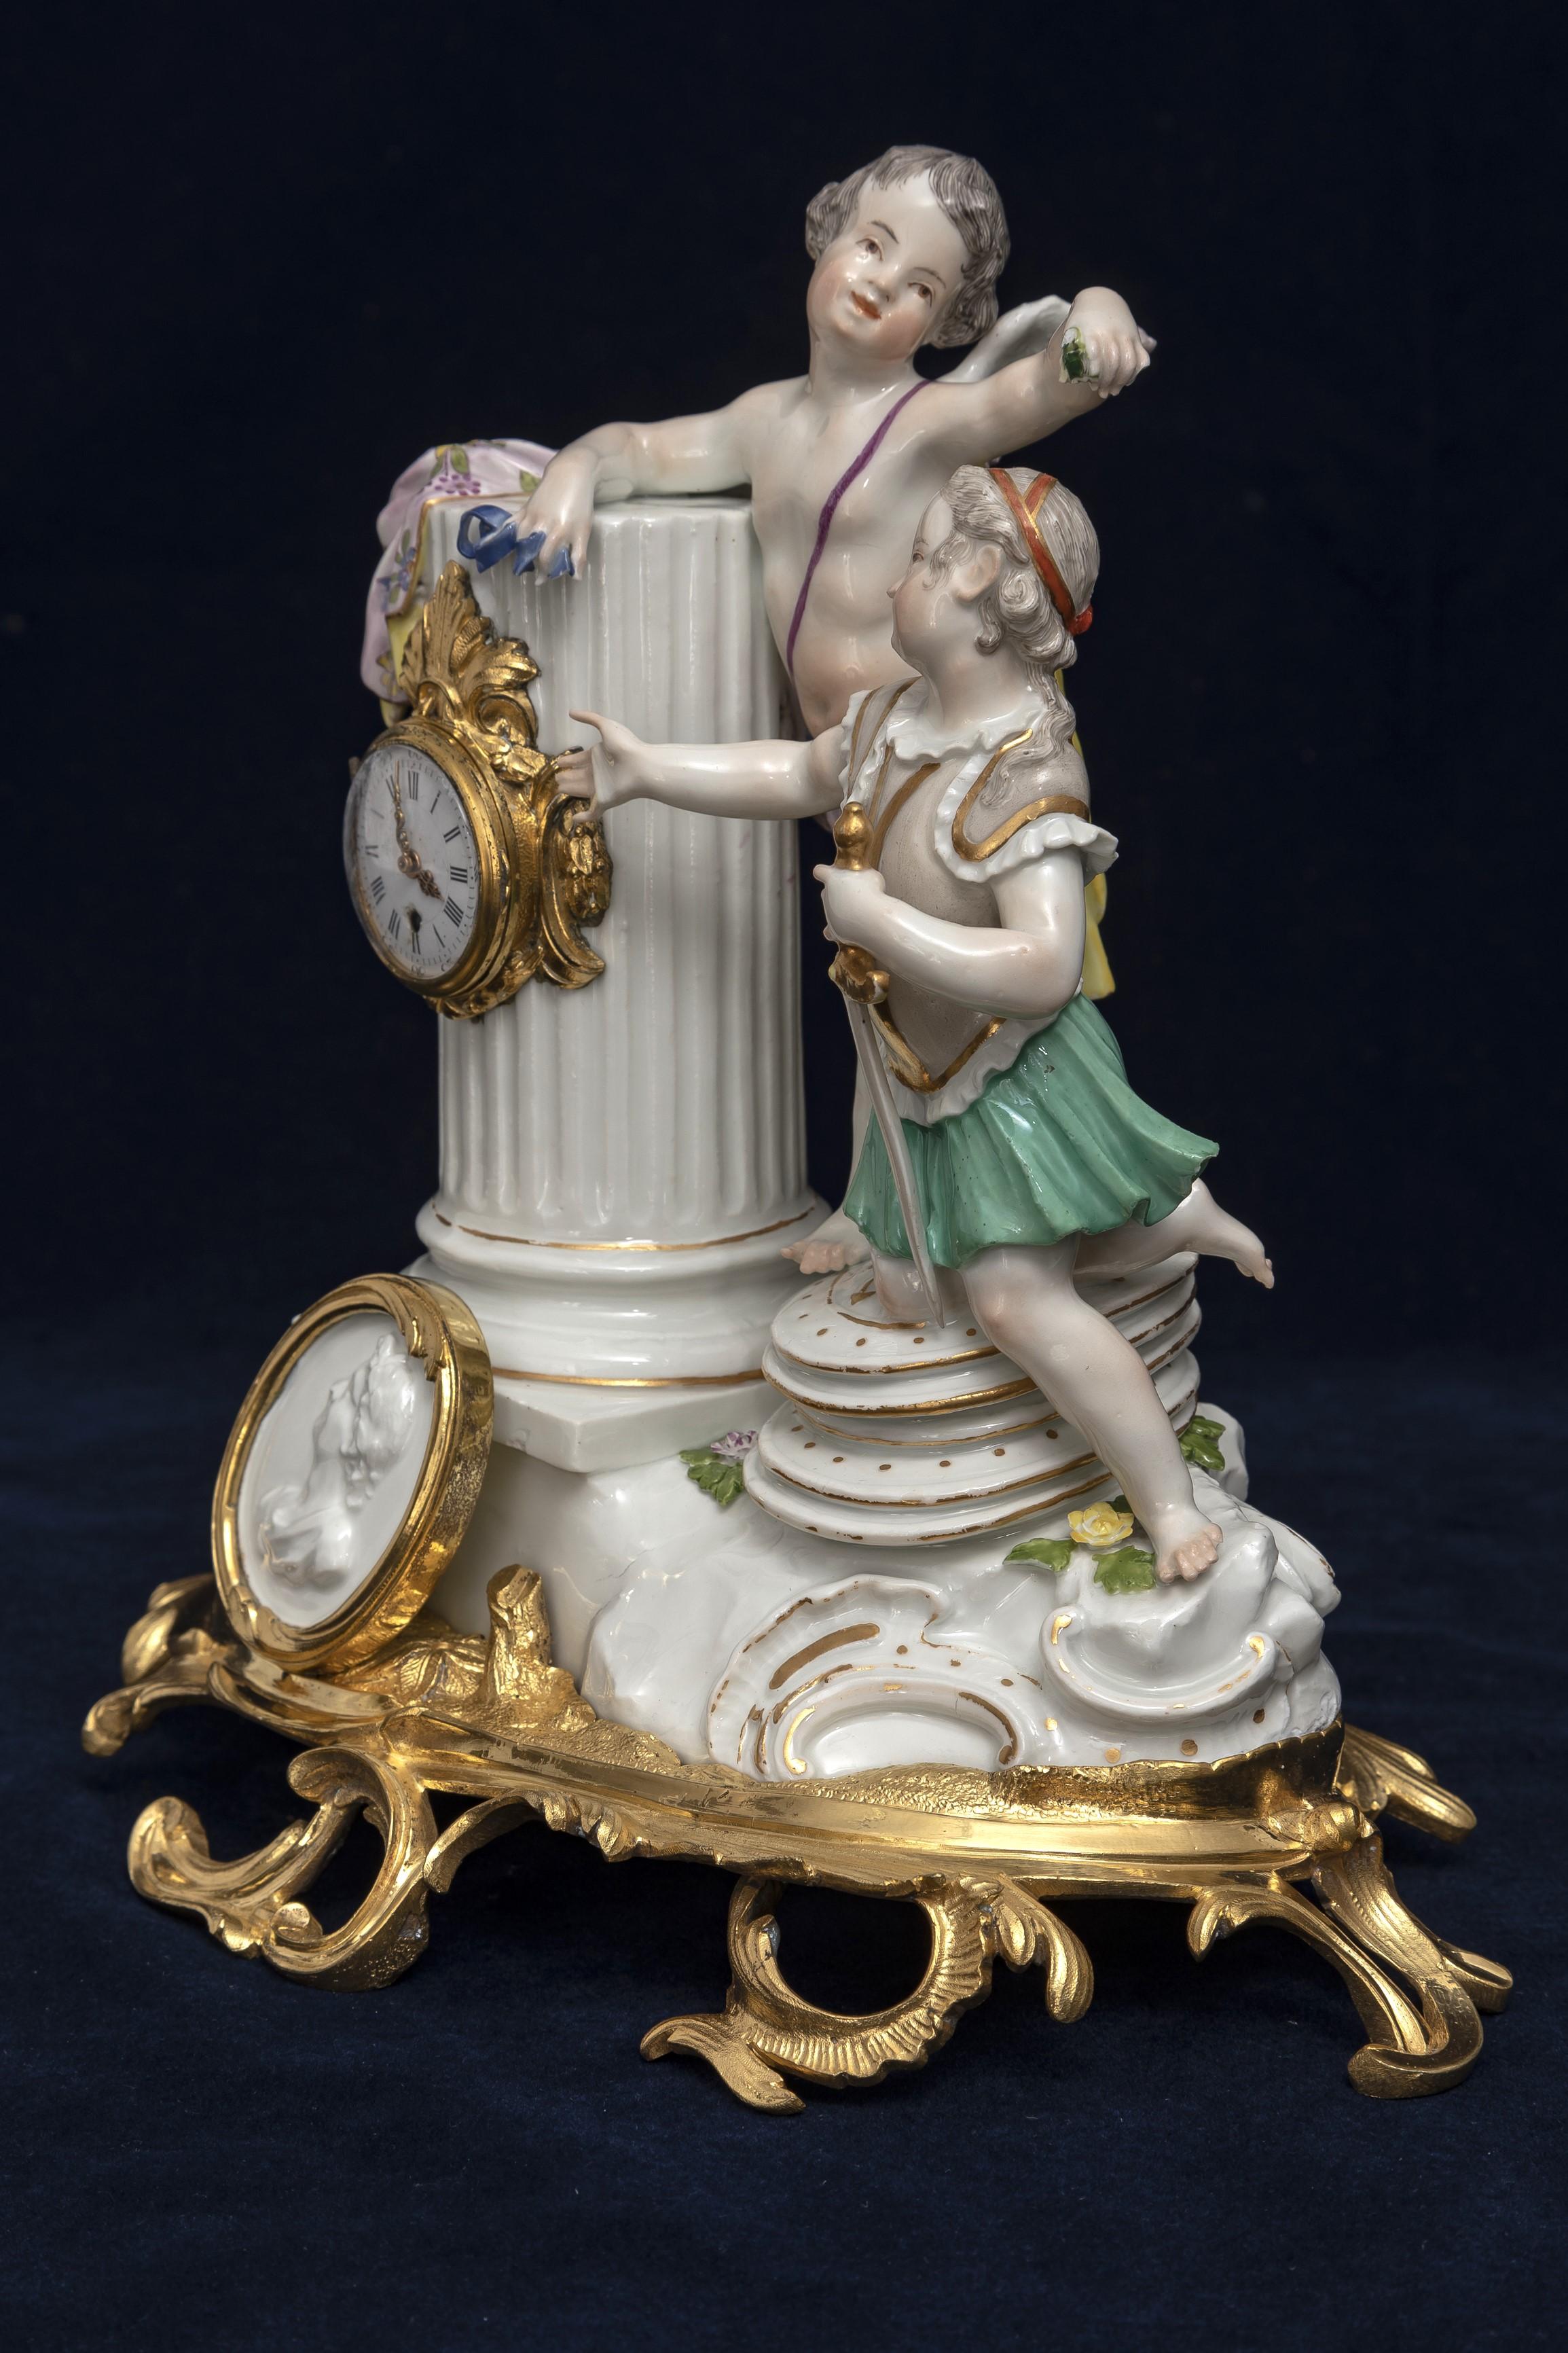 An Important Rare 18th C. Ormolu Mounted Meissen Porcelain Putti Clock Grouping For Sale 2